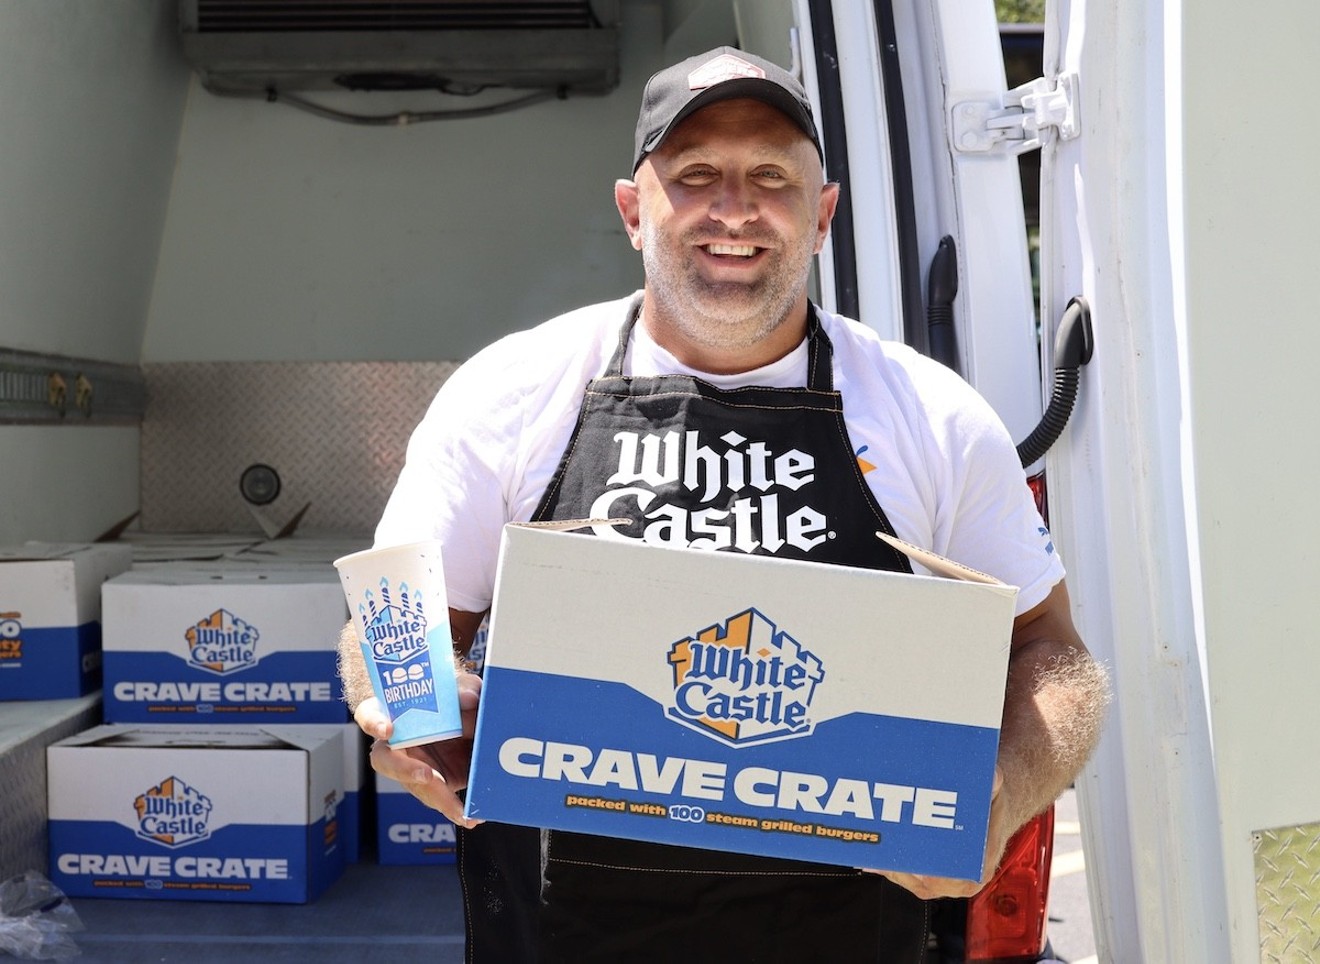 Red Meat Lovers Club cofounder Evan Darnell coordinated the purchase of a White Castle "Crave Pallet" as a charitable endeavor.